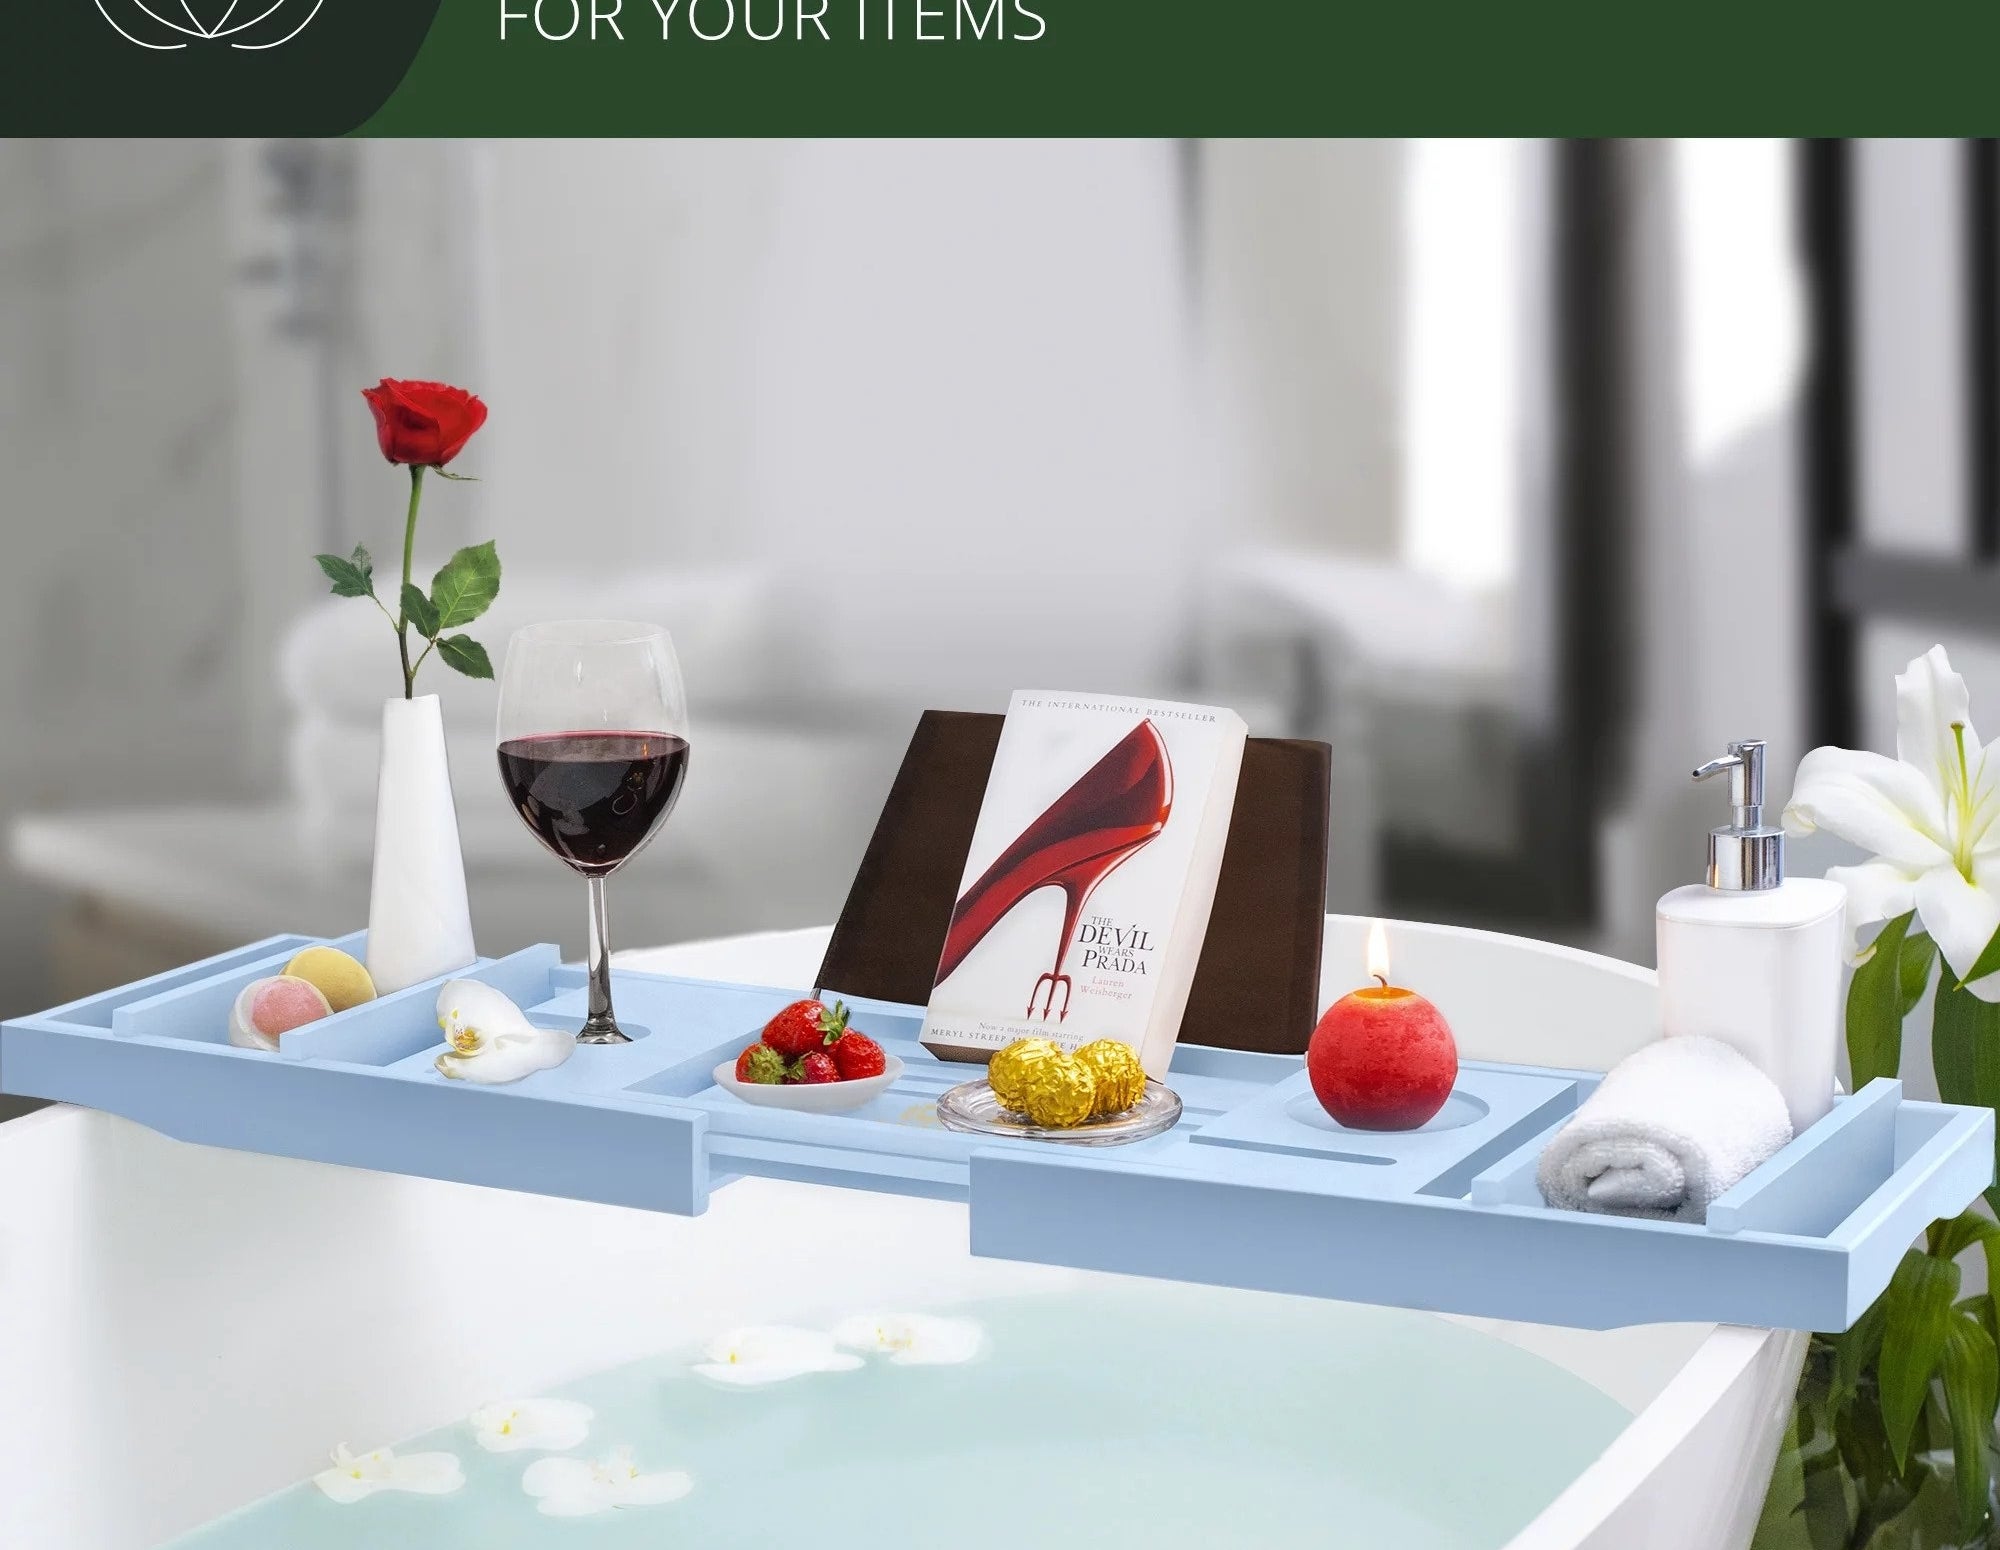 Baby blue bath tray holding multiple items including flower vase, glass of red wine, book, candle, soap dispenser and white towel, sitting over white tub